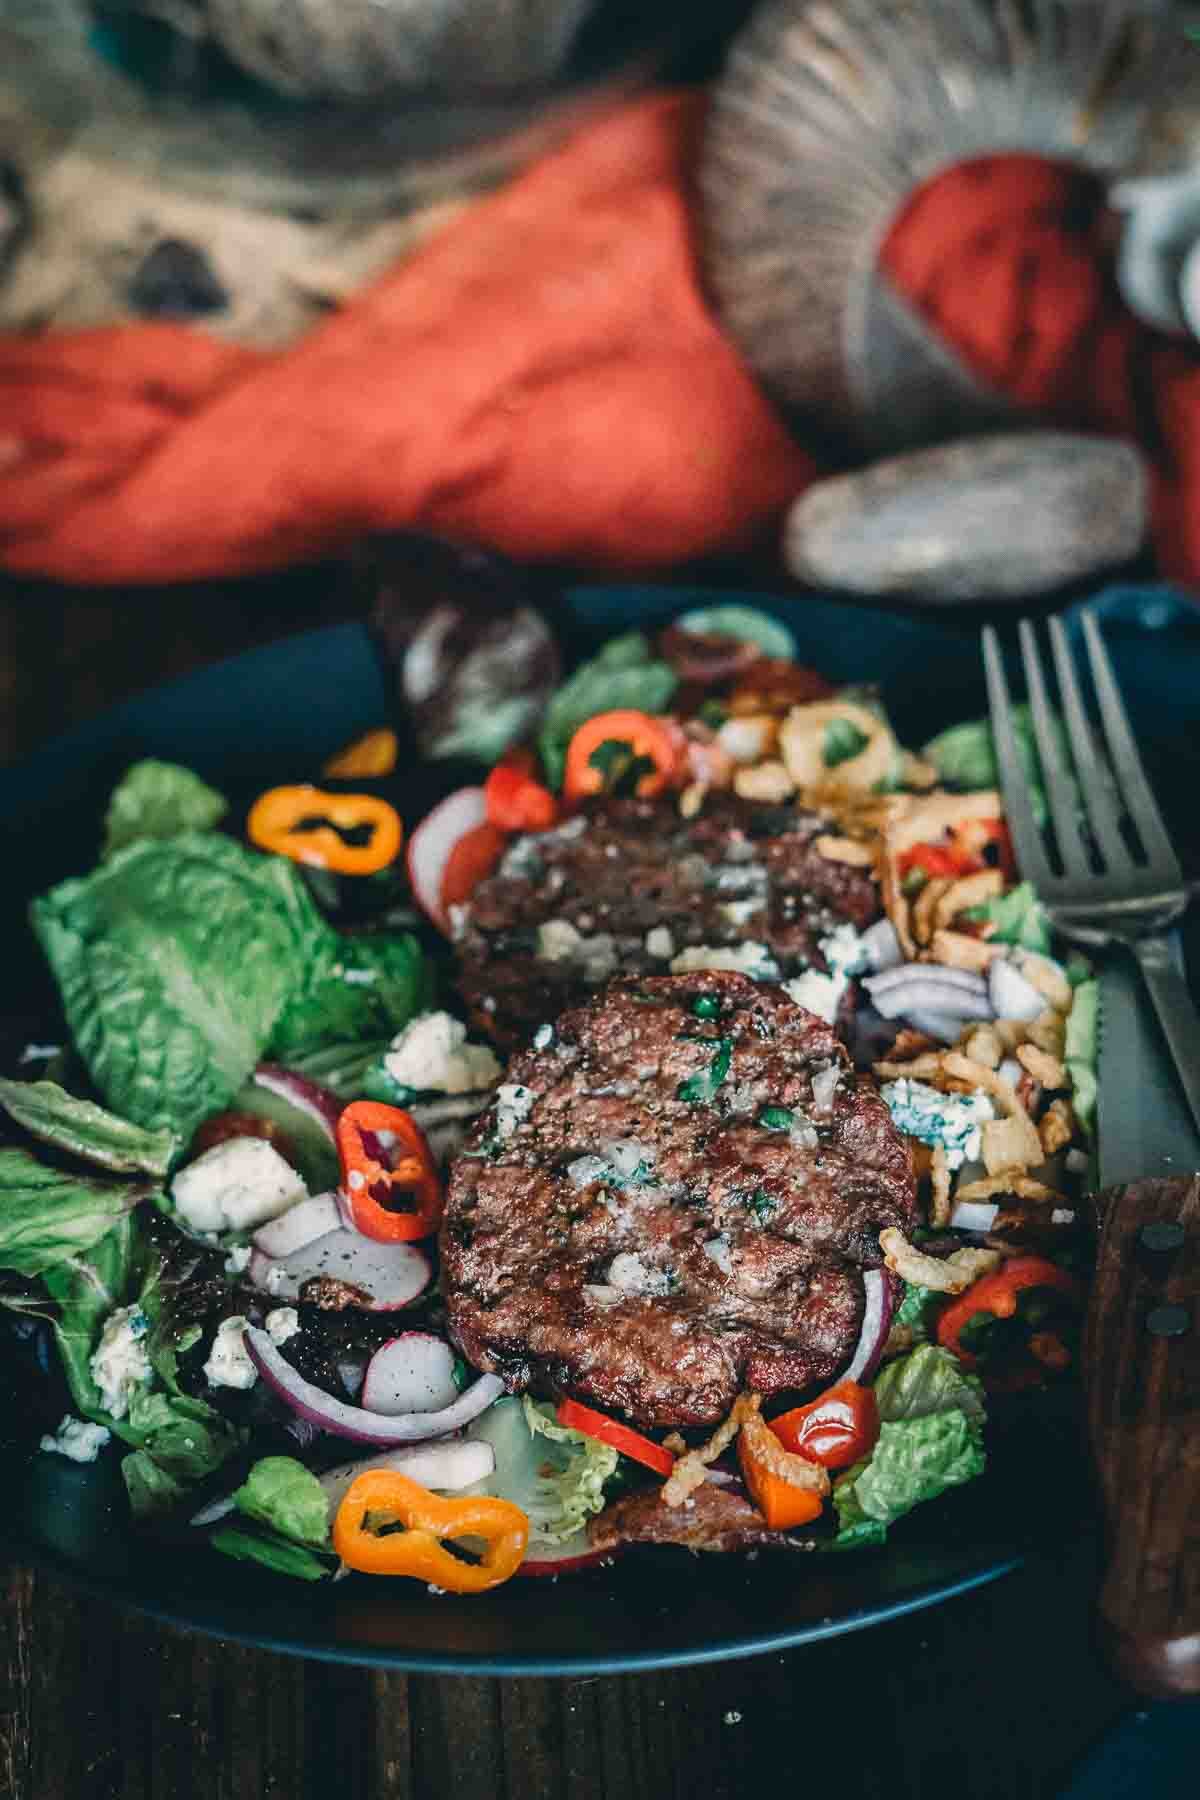 Smoked hamburgers over hearty steakhouse salad with sliced veggies and blue cheese crumbles. 